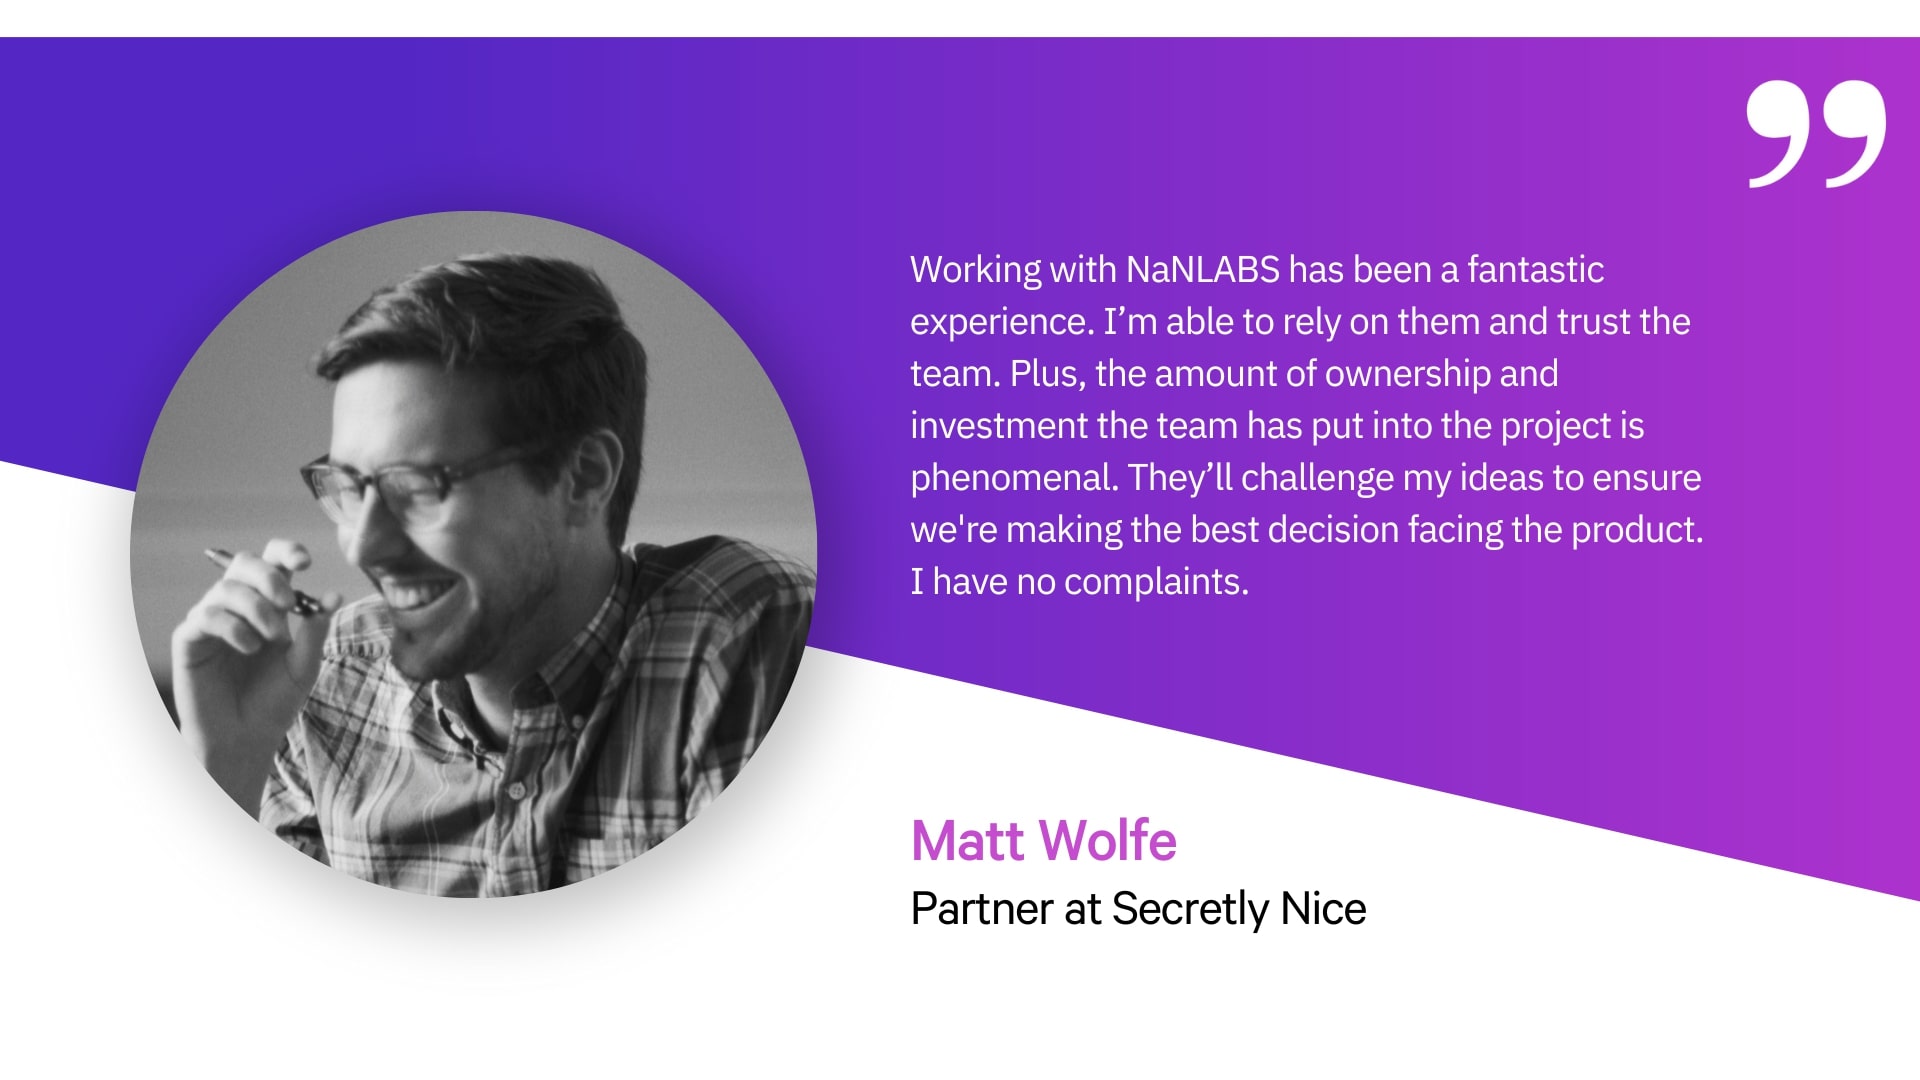 Quote by Secretly Nice Partner on NaNLABS performance as a team augmentation company